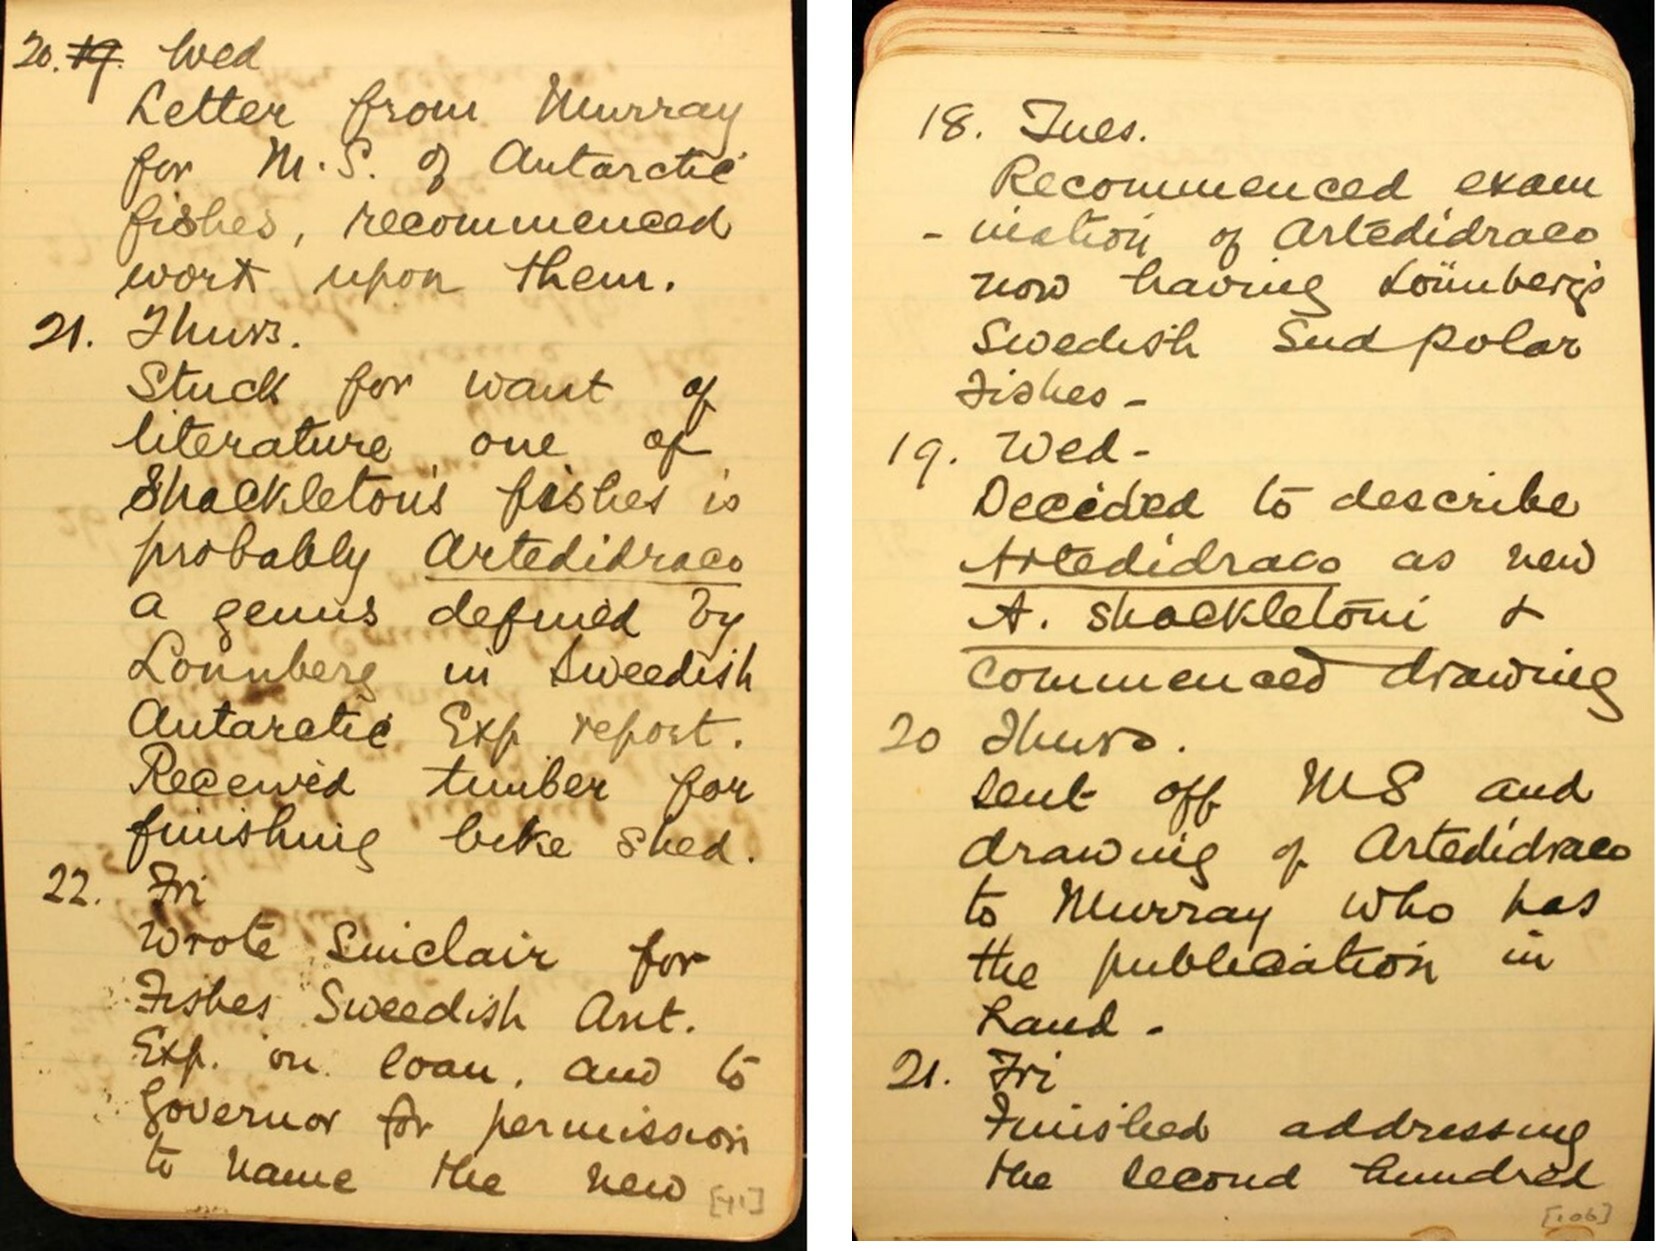 Edgar Waite’s diary entries in October 1909 (left) and January 1910 (right) record his initial work with the Antarctic fishes where he becomes stuck for a name for one specimen, and then on receipt of further information he is able to give the fish a new species name Artedidraco shackletoni after Shackleton and the expedition it was collected on 3 years prior. Images courtesy of the Australian Museum